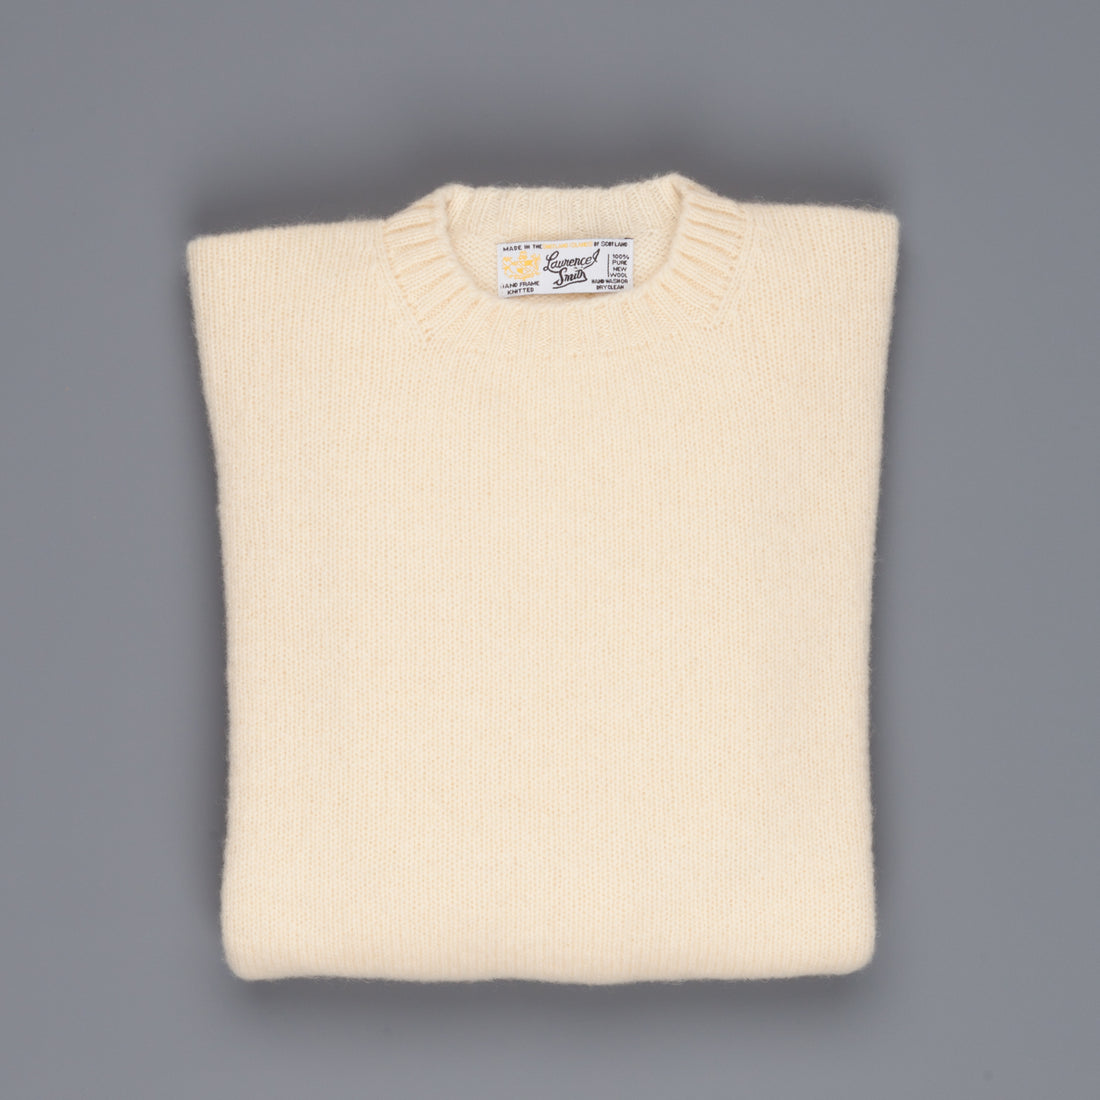 Laurence J. Smith  Super soft Seamless Crew Neck Pullover Cream